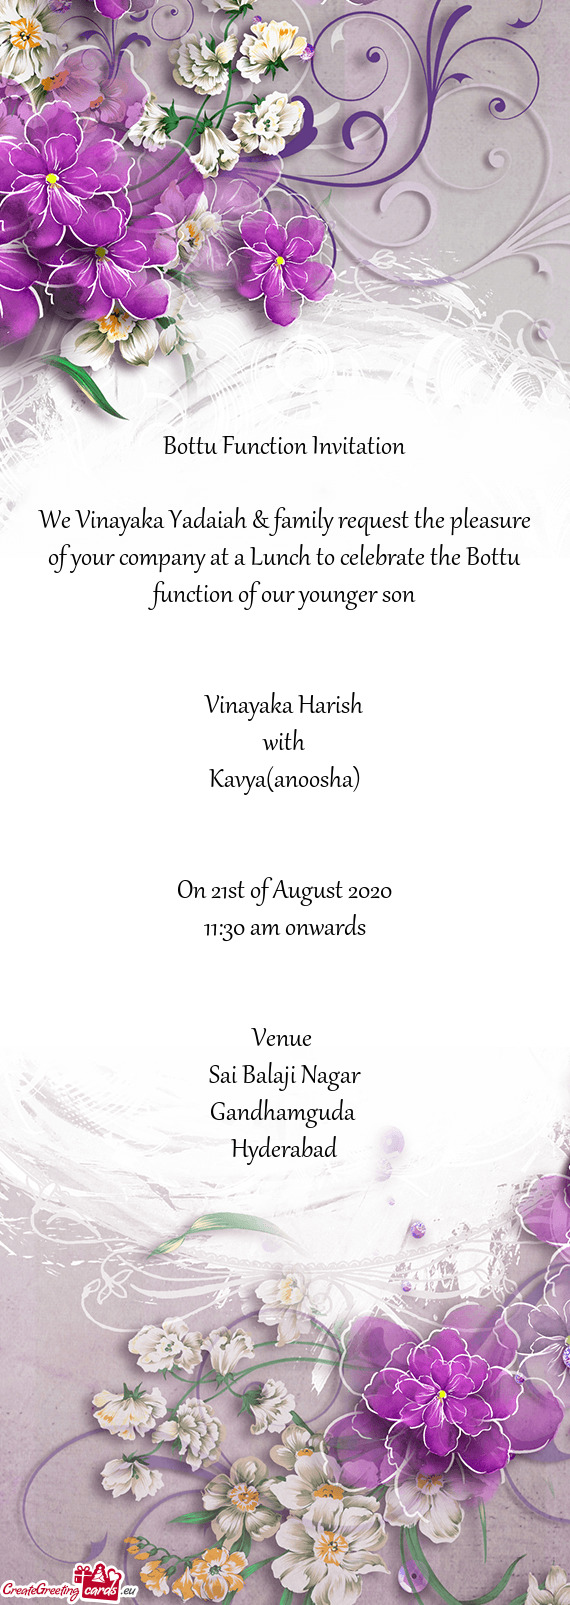 We Vinayaka Yadaiah & family request the pleasure of your company at a Lunch to celebrate the Bottu